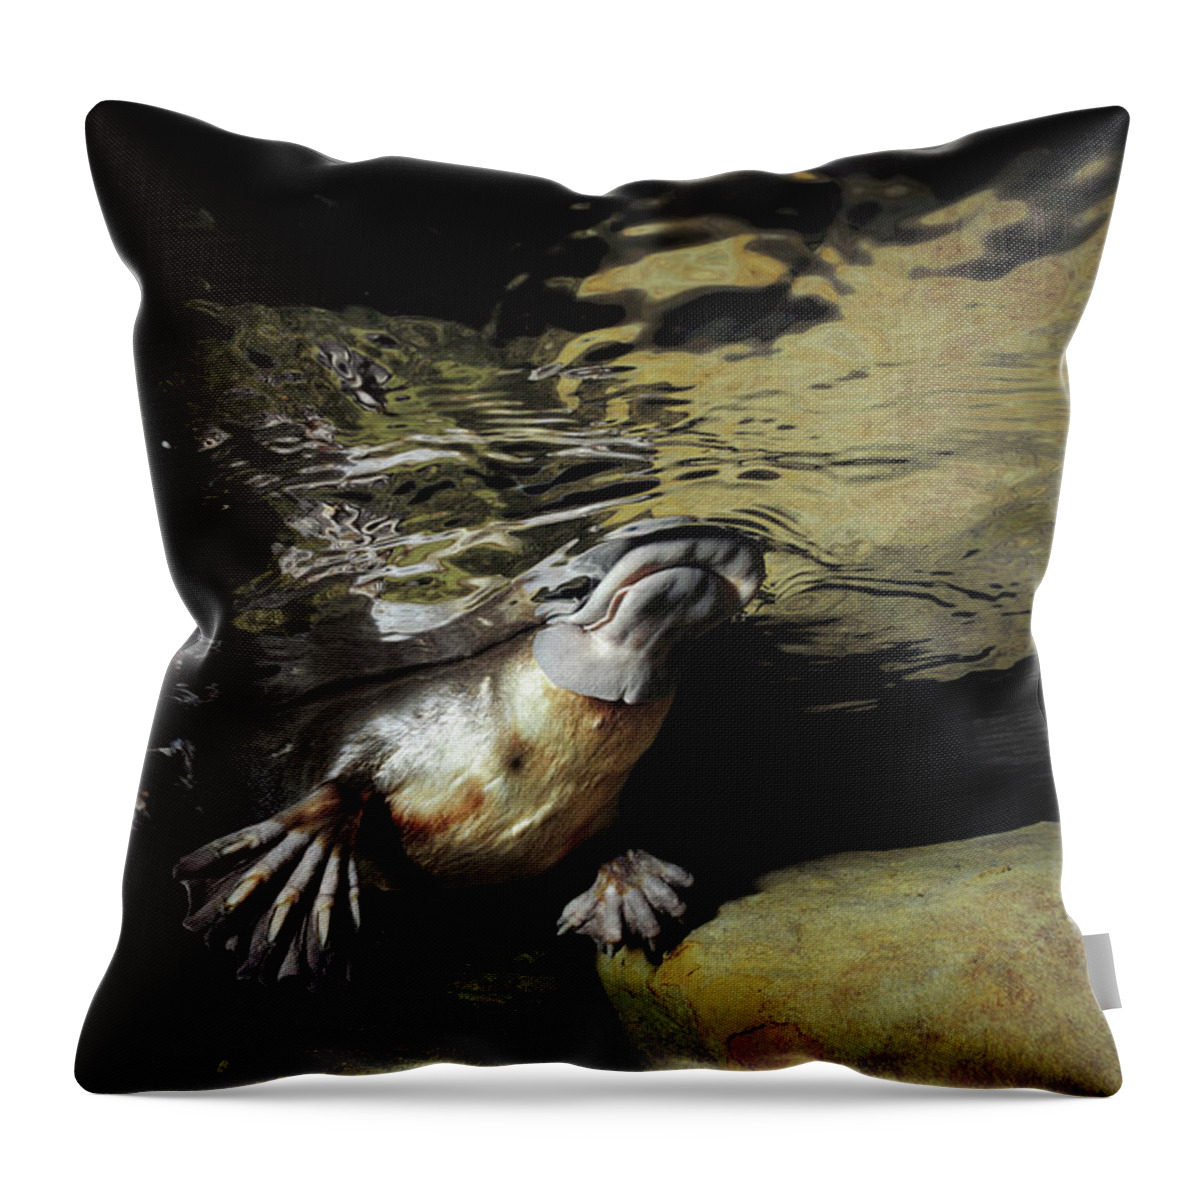 David Parer-cook Throw Pillow featuring the photograph Platypus Surfacing by David Parer and Elizabeth Parer-Cook